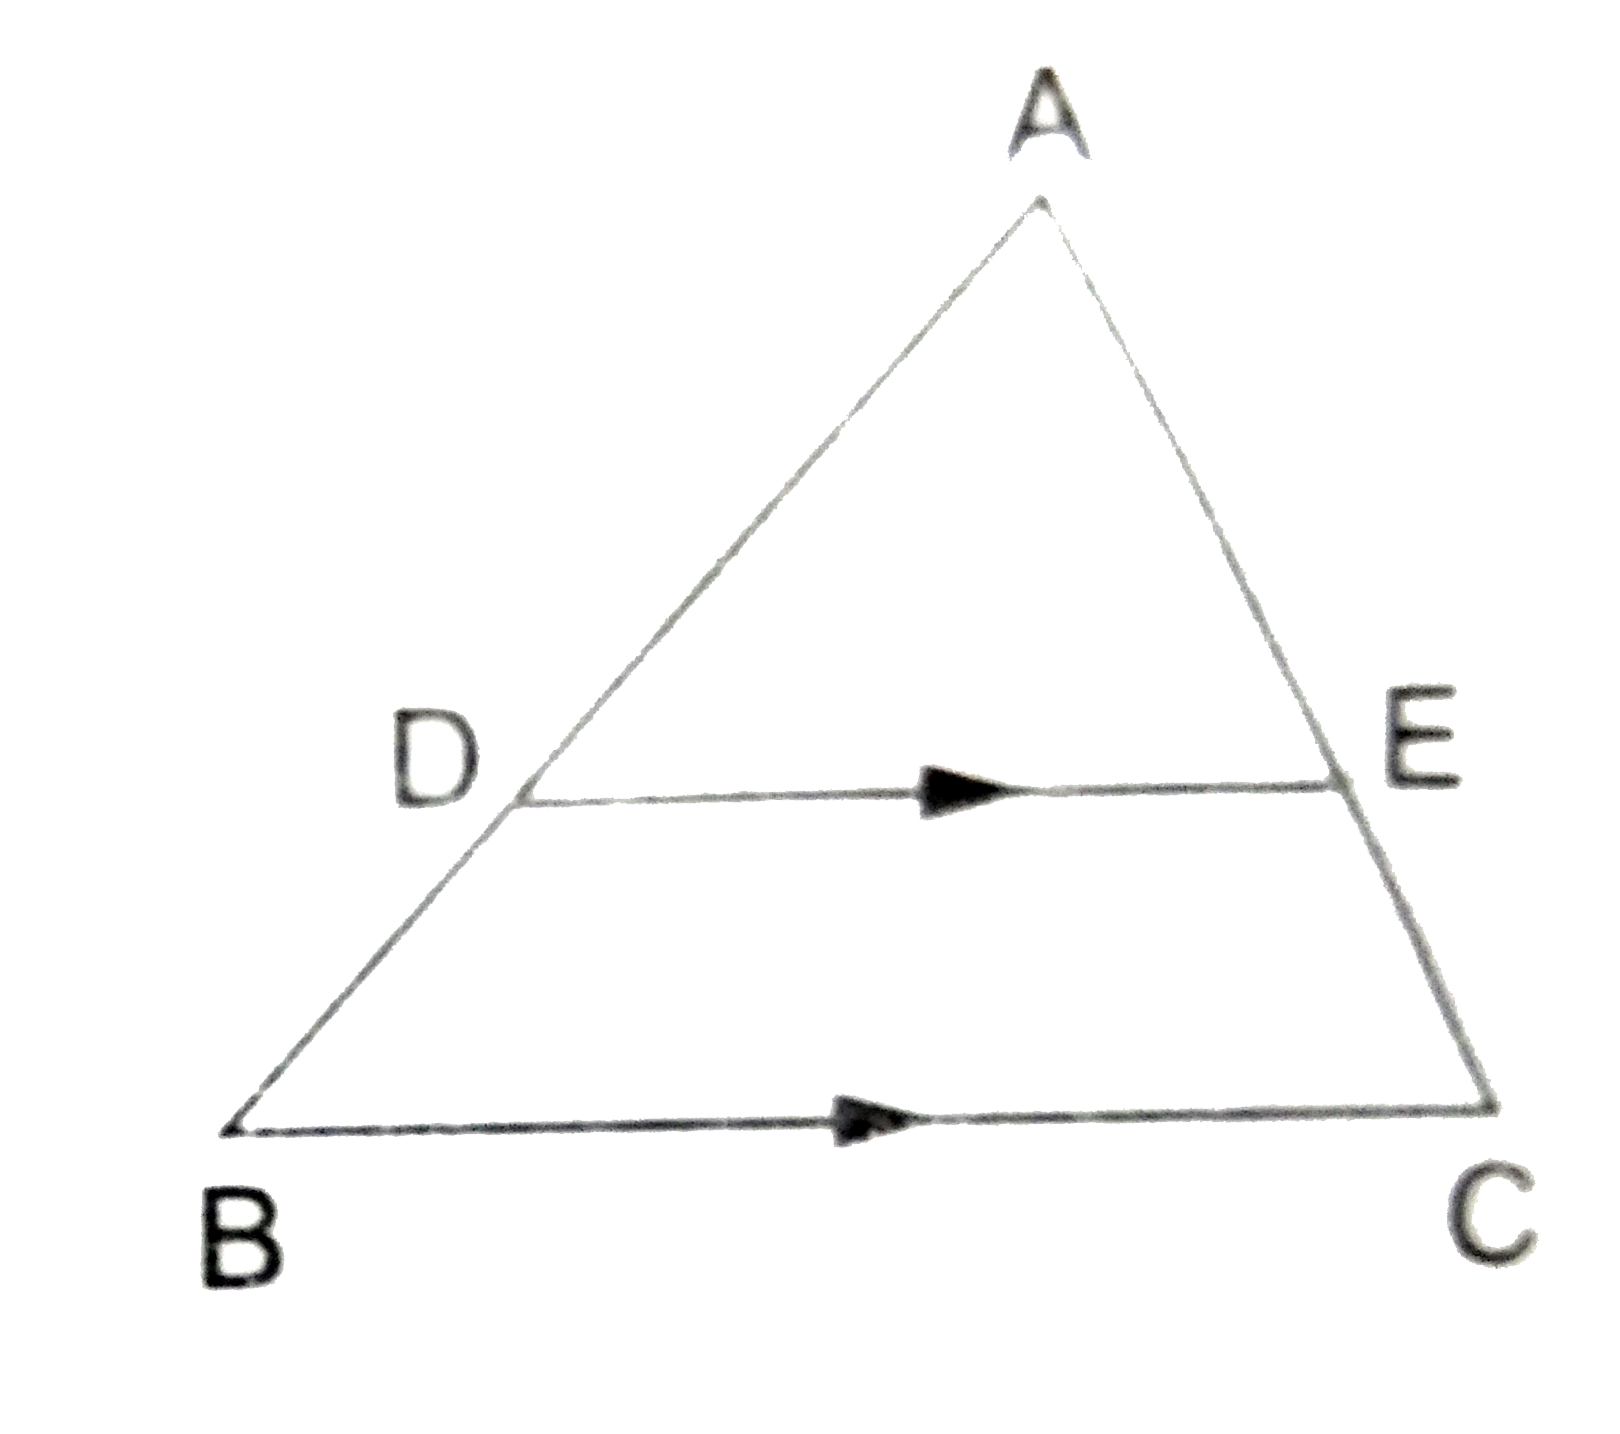 In a  Delta ABC, if DE is drawn parallel to BC, cutting AB and AC to D and E respectively such that AB=7.2 cm, AC=6.4 cm and AD=4.5 cm. Then,  AE=?